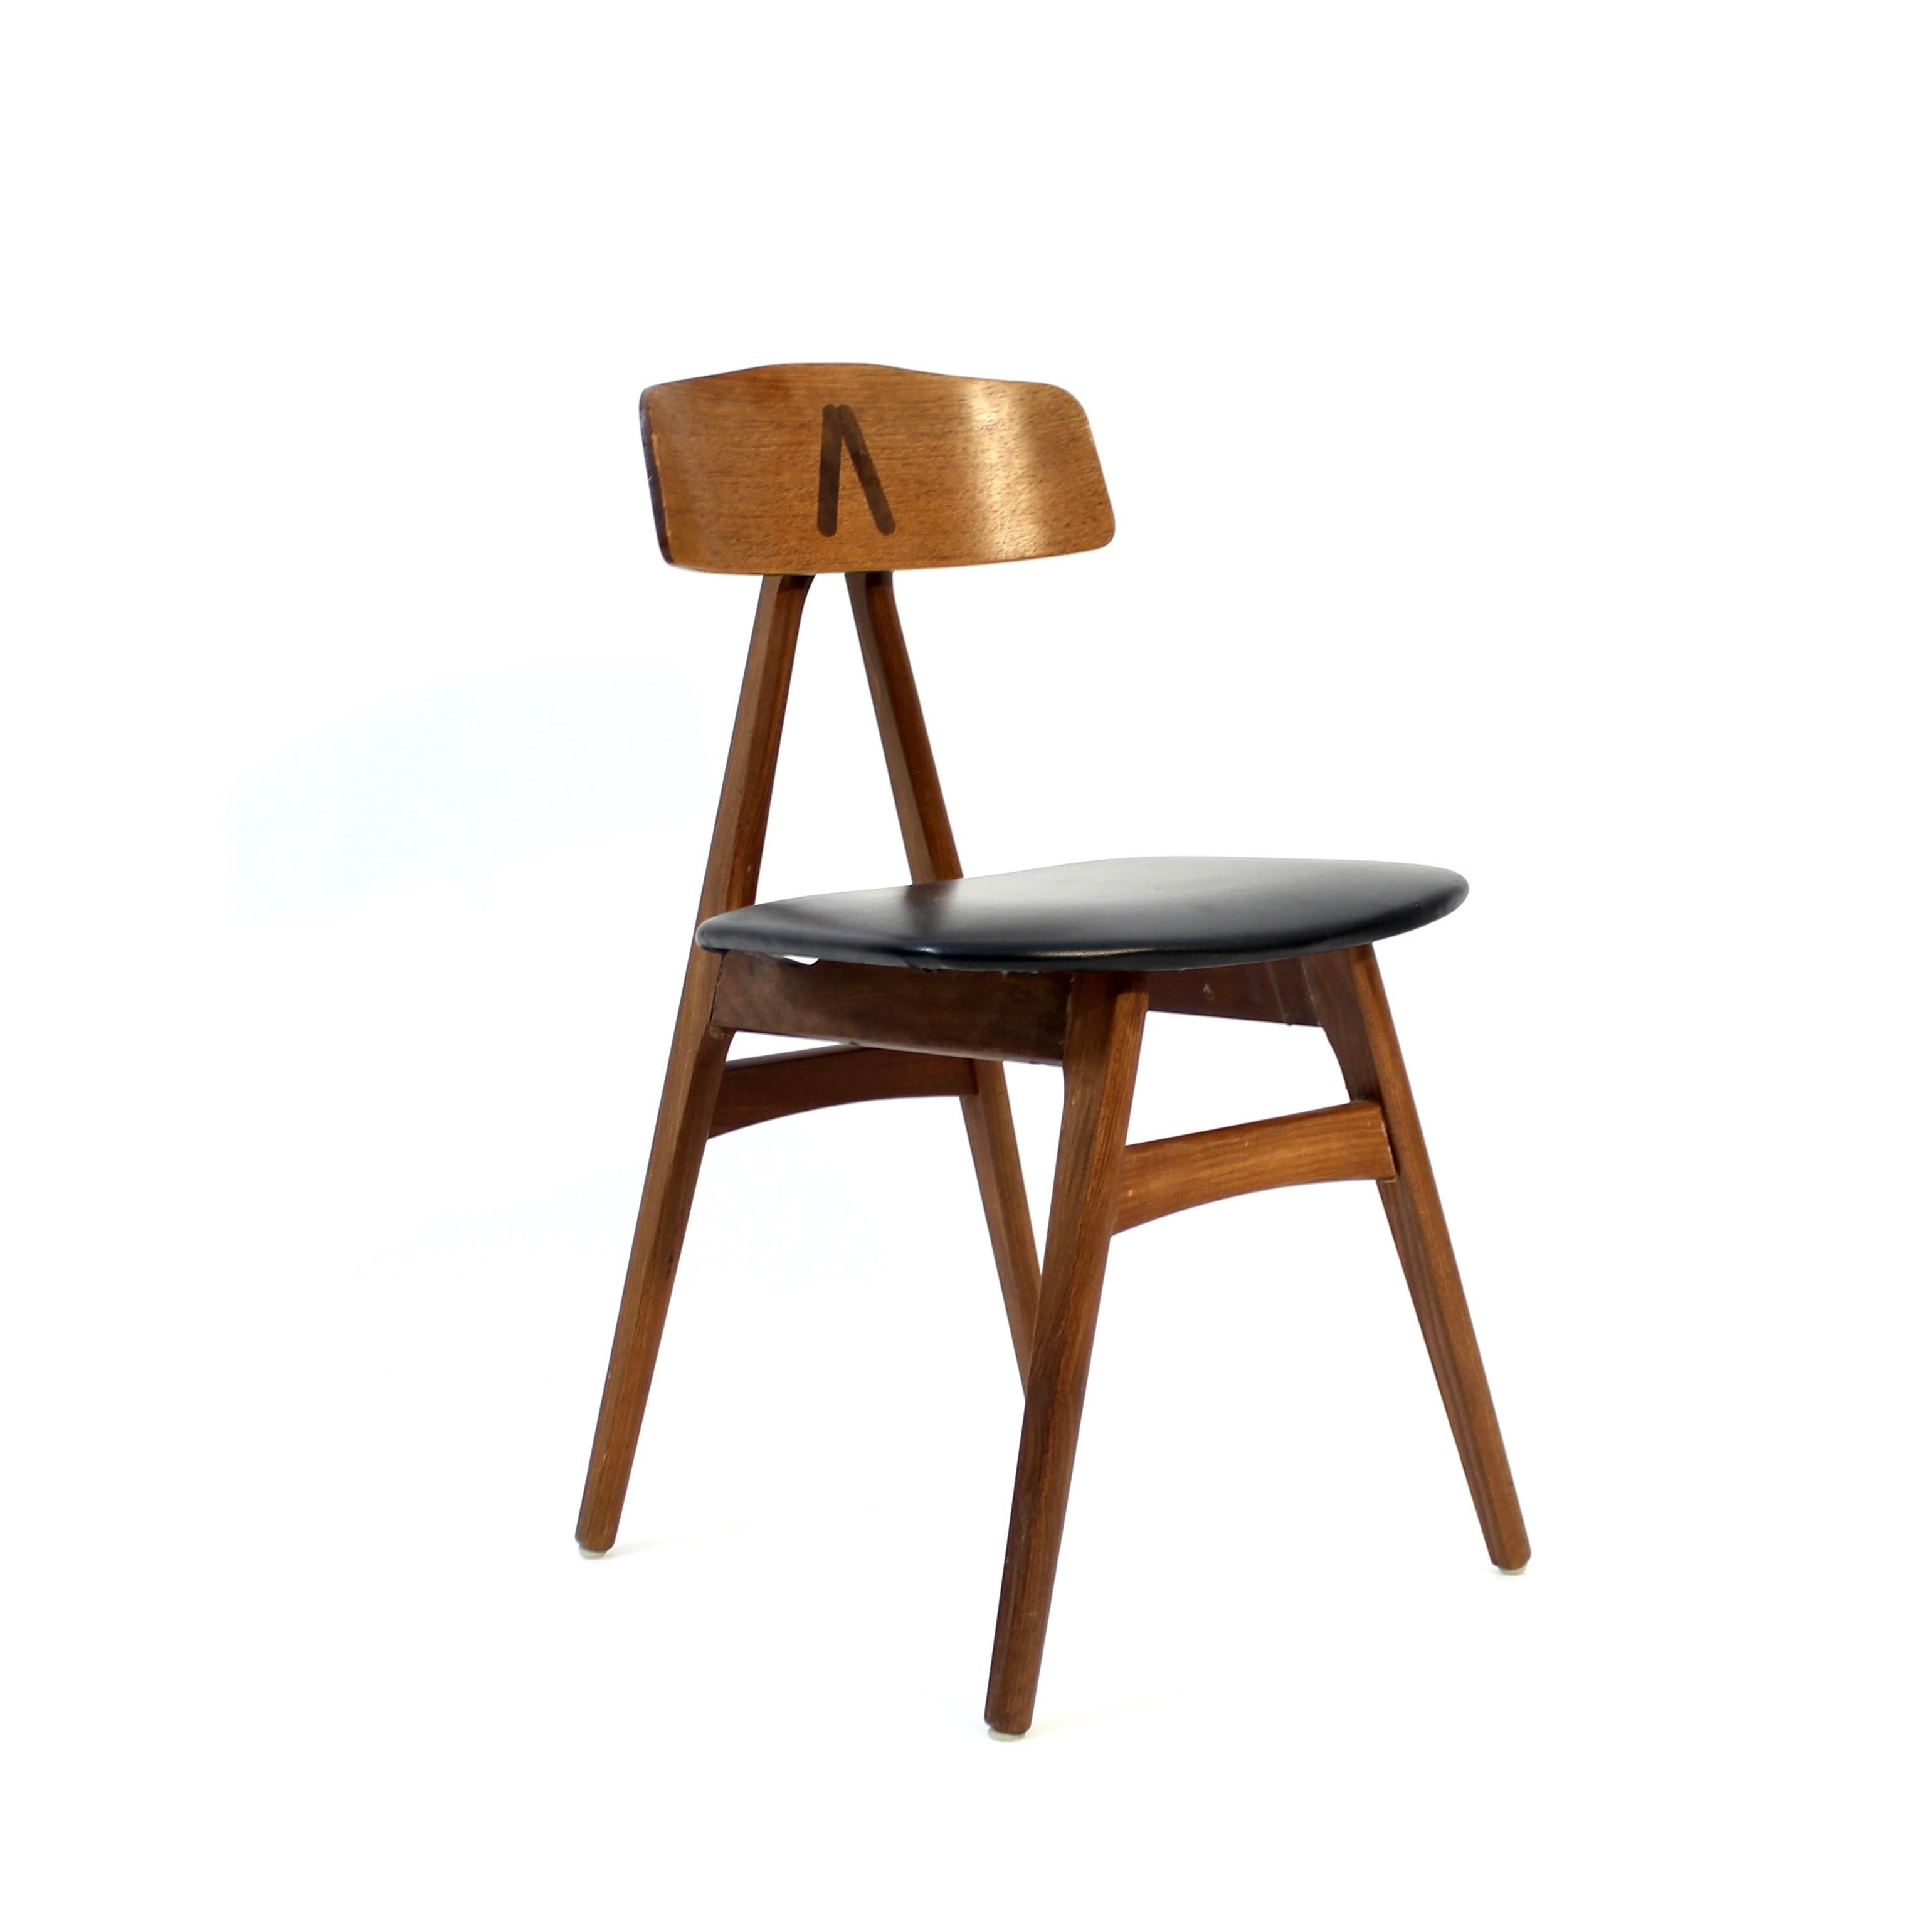 Bengt Ruda, Nizza teak chair for IKEA, 1959 In Good Condition For Sale In Uppsala, SE